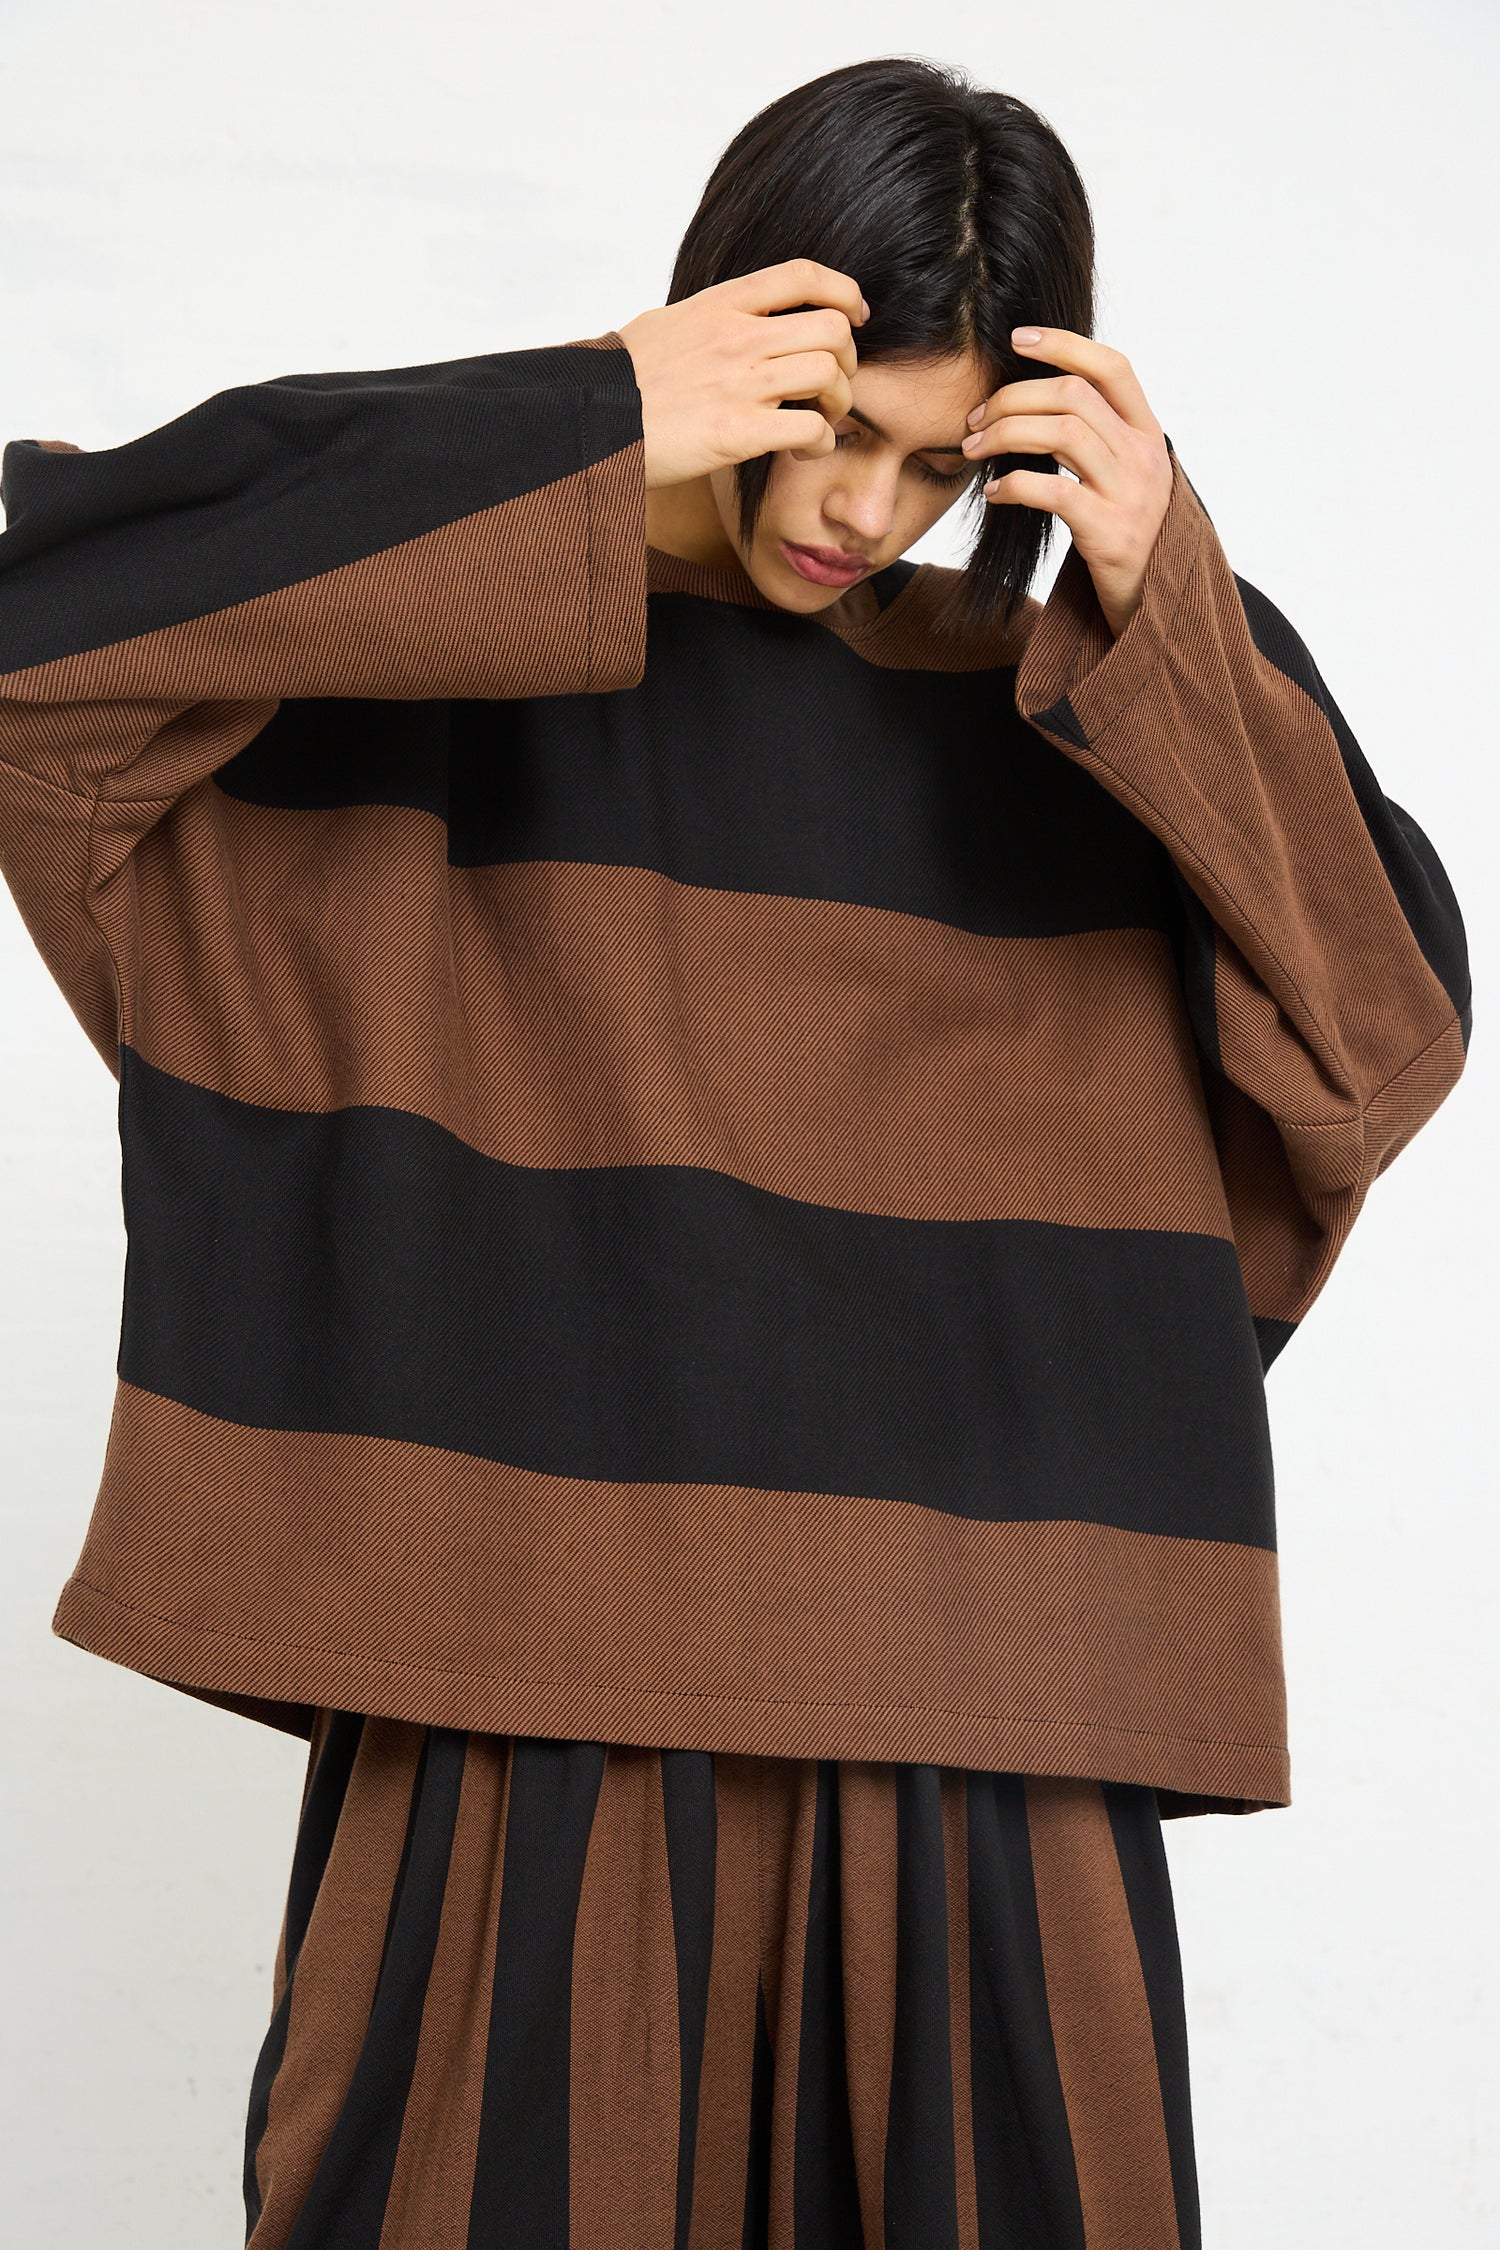 Woman in a striped Marrakshi Life Twill Sweater in Black and Brown Stripe with oversized long sleeves, holding her head, appearing thoughtful or concentrated.